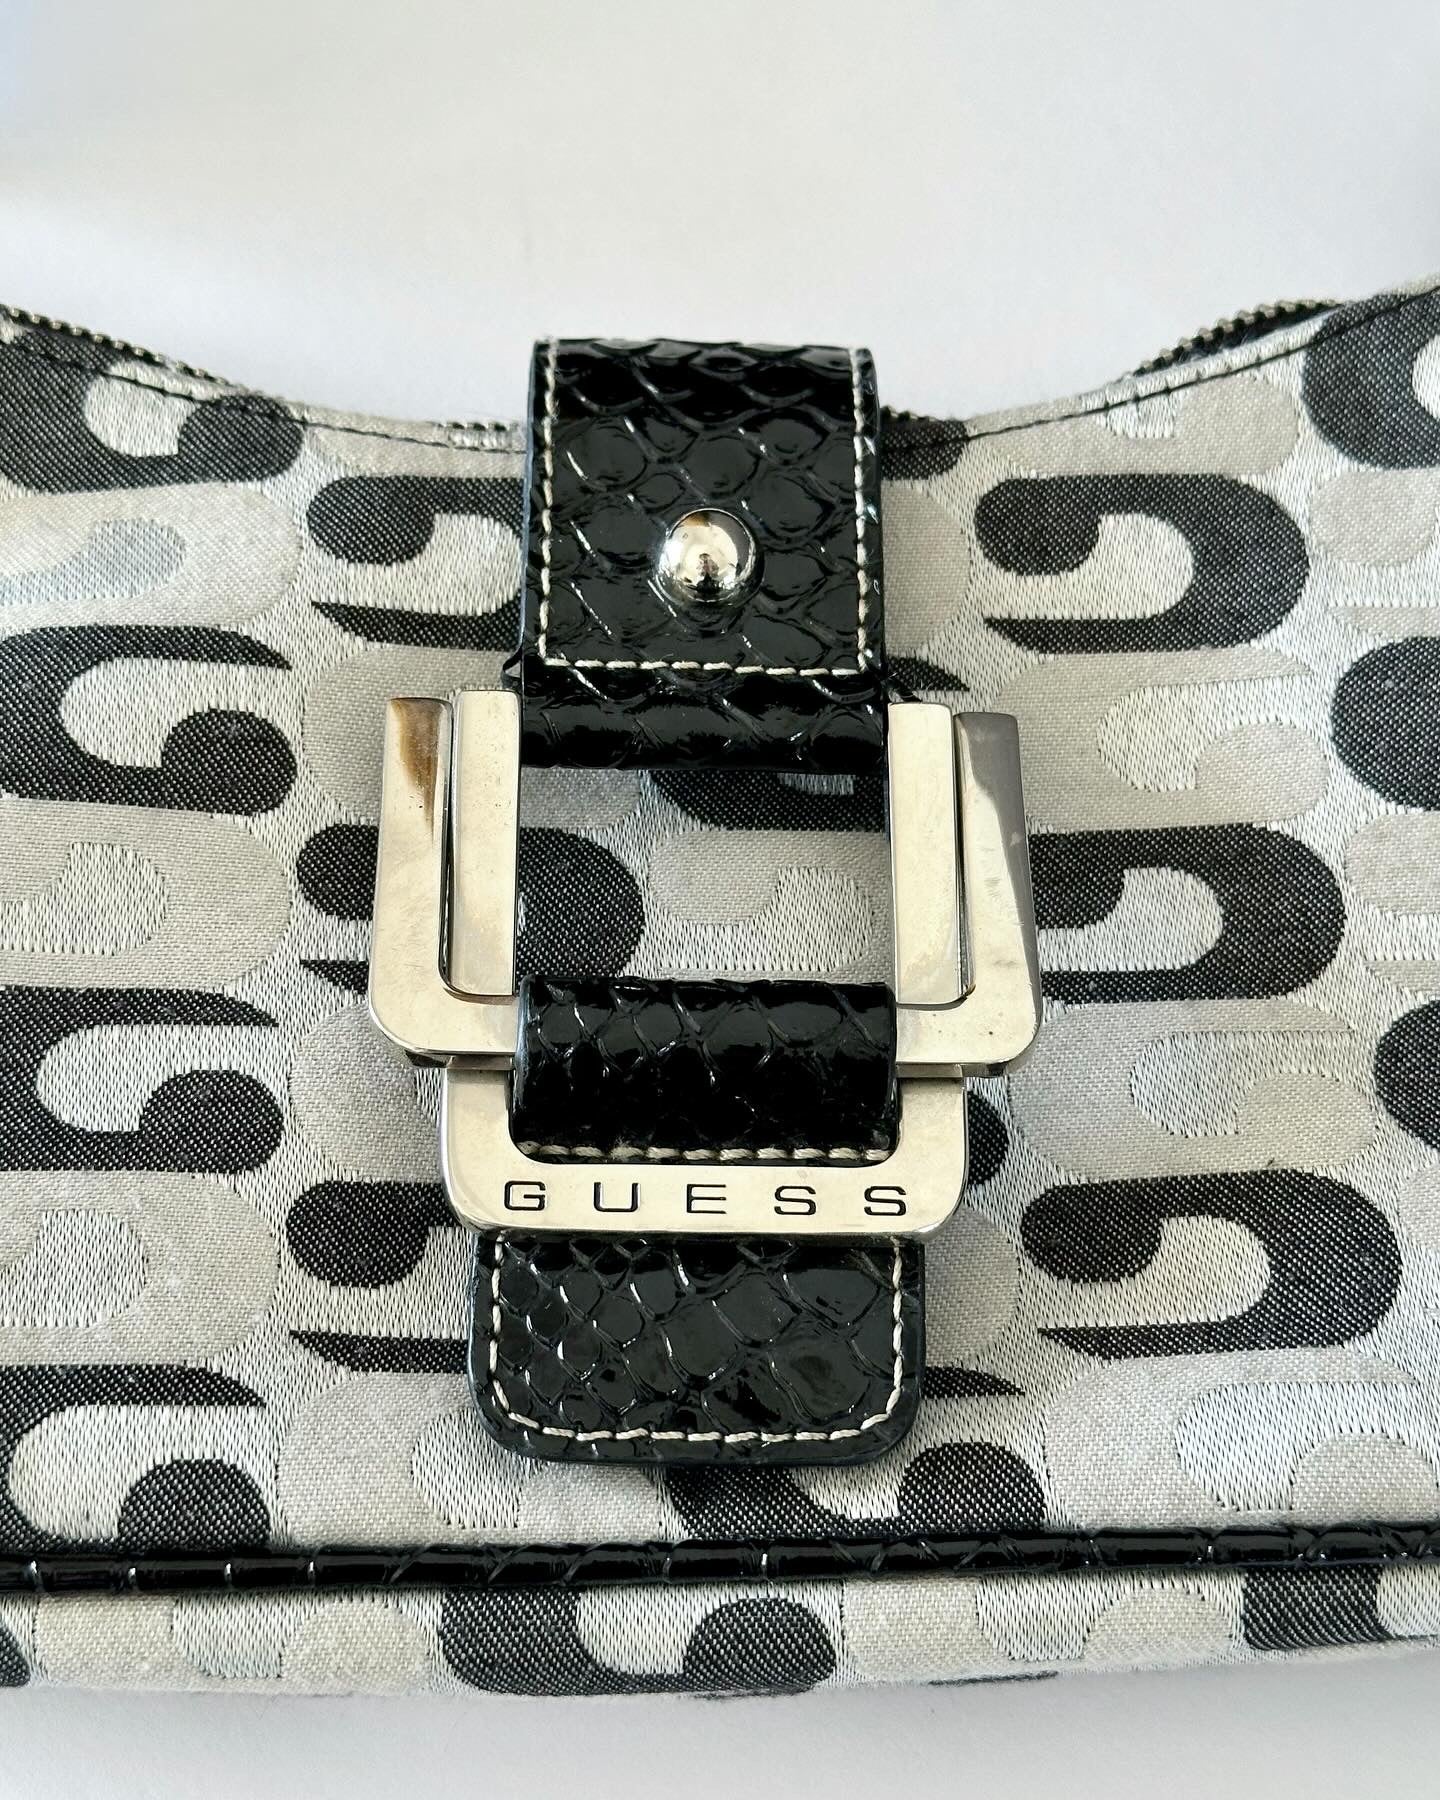 Super trendy vintage Guess bag with monogram print from 00s